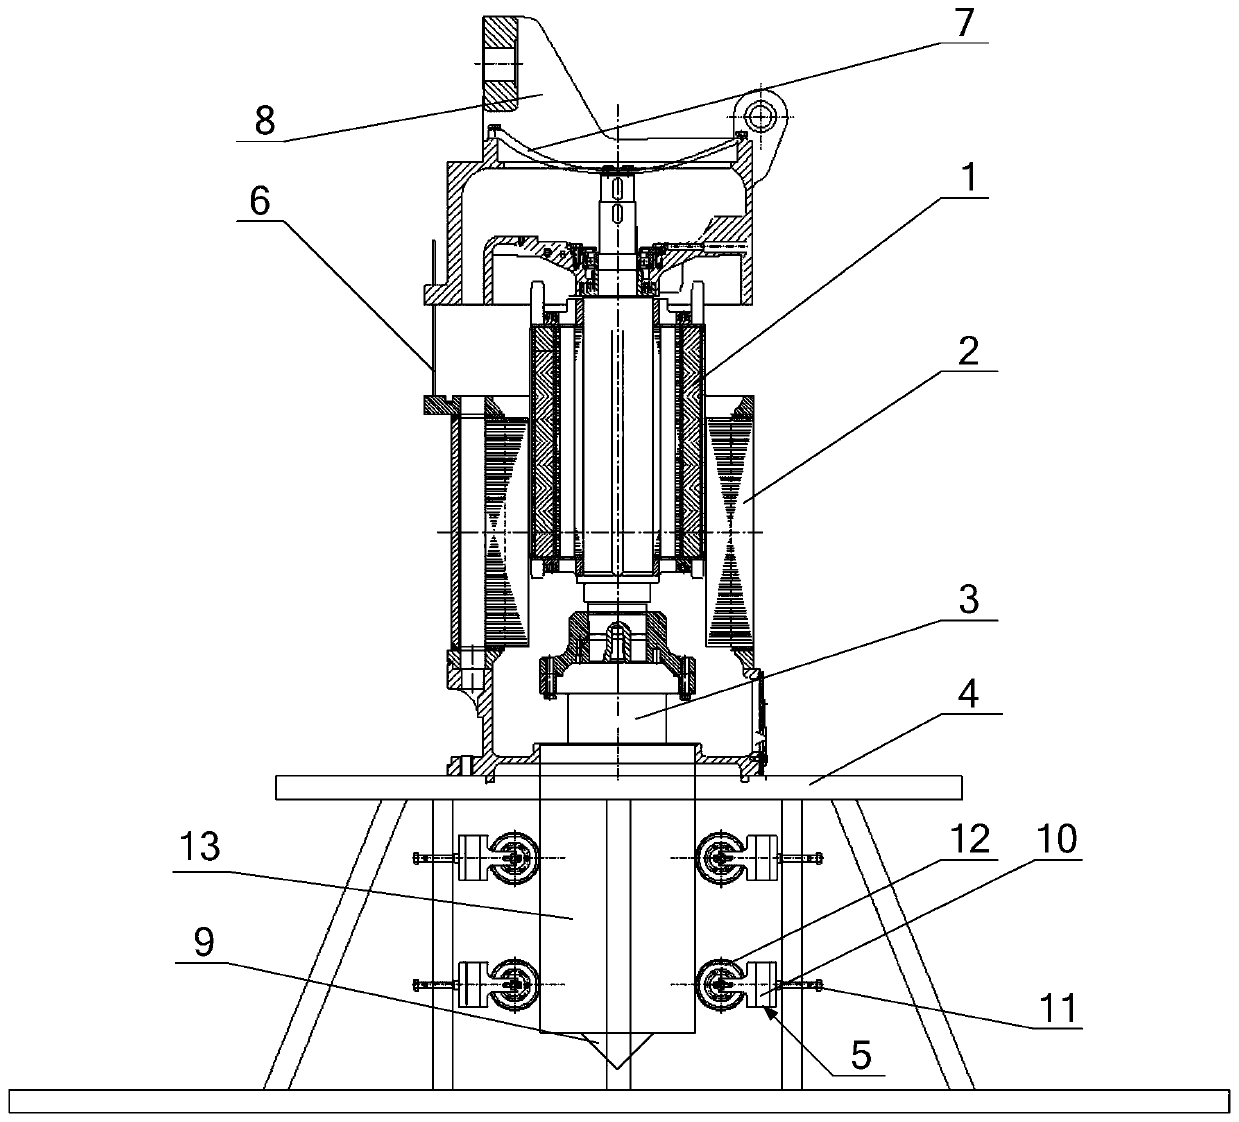 A motor stator and rotor assembly device